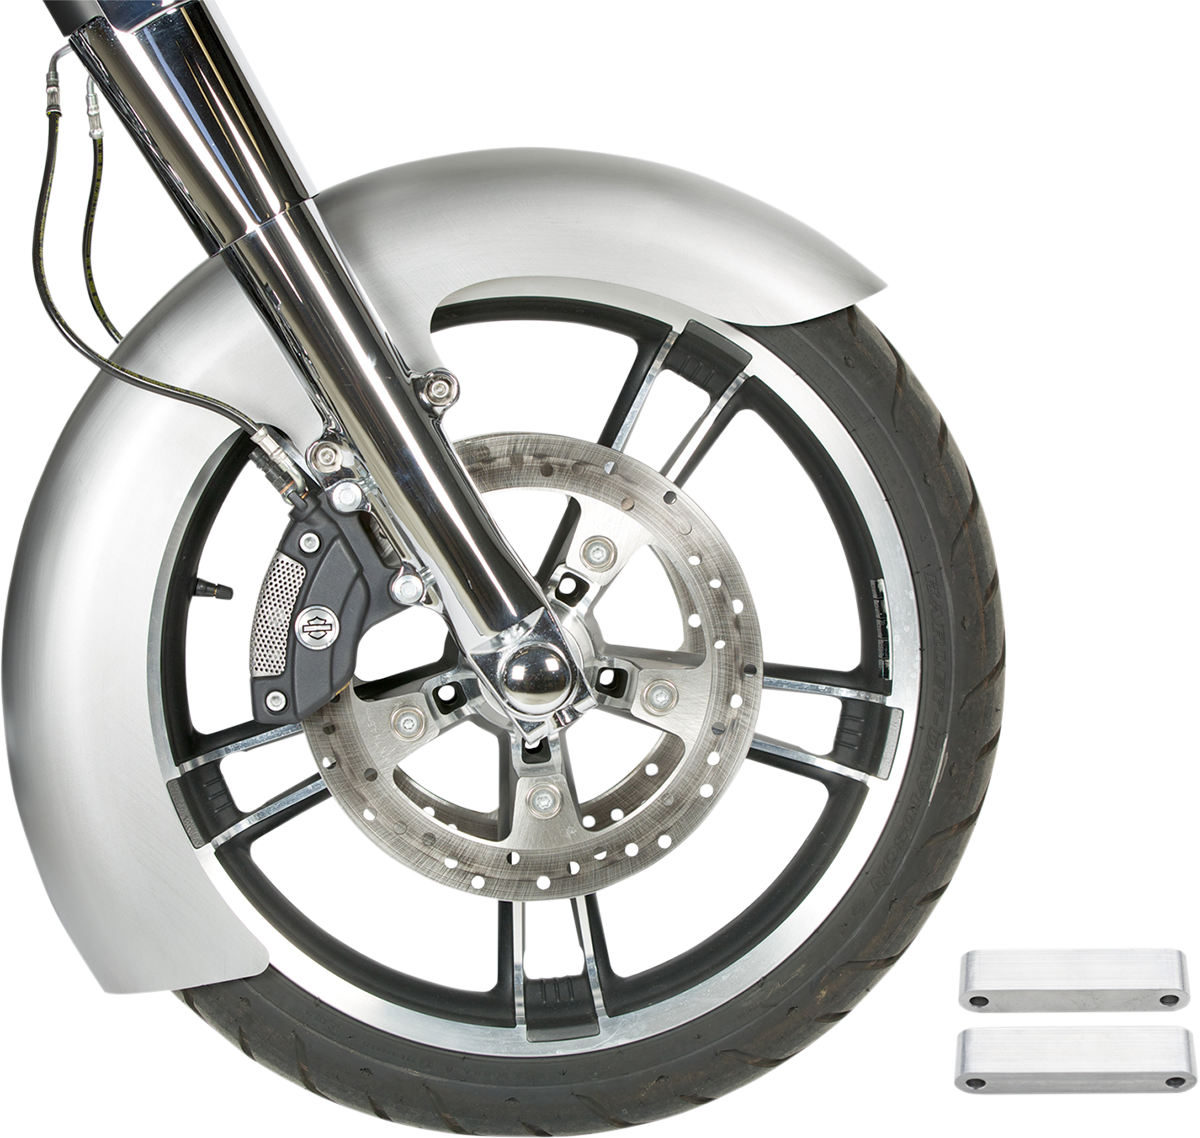 Russ Wernimont LS-2 Front Fender for 21" Wheel 2014-2022 Harley Touring Models